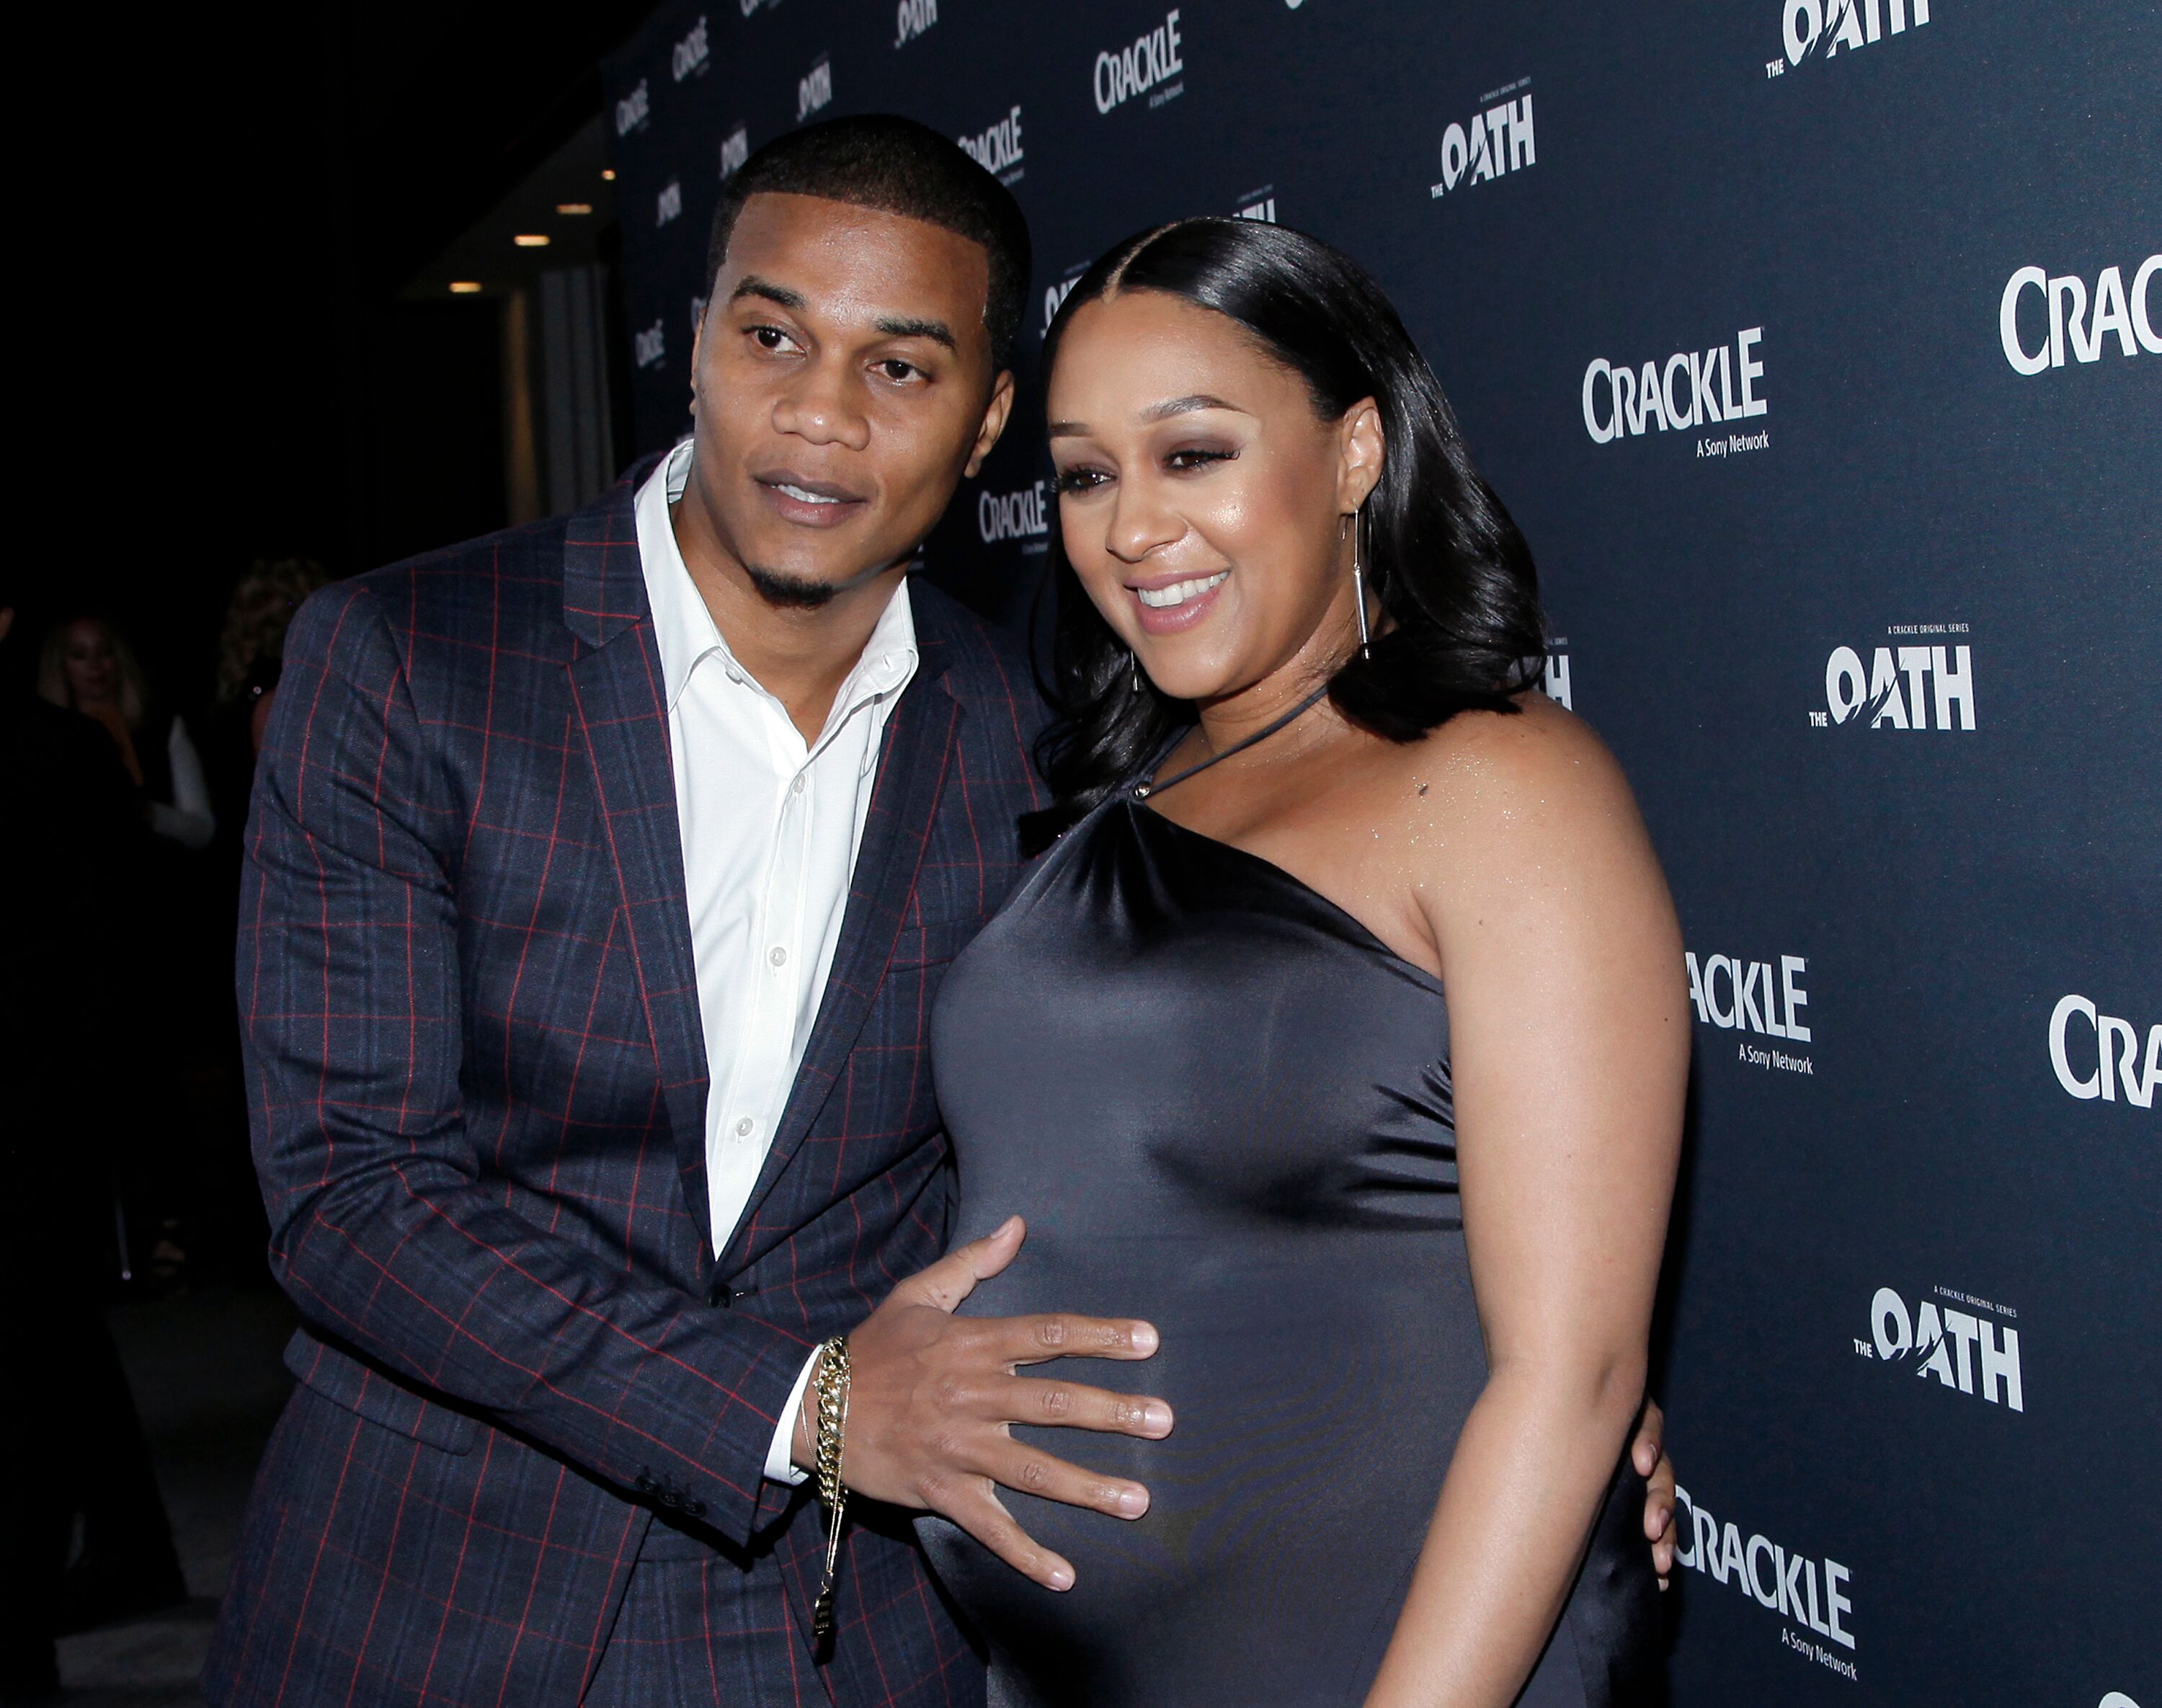 Cory Hardrict and Tia Mowry attending a premiere while pregnant with daughter Cairo | Source: Getty Images/GlobalImagesUkraine